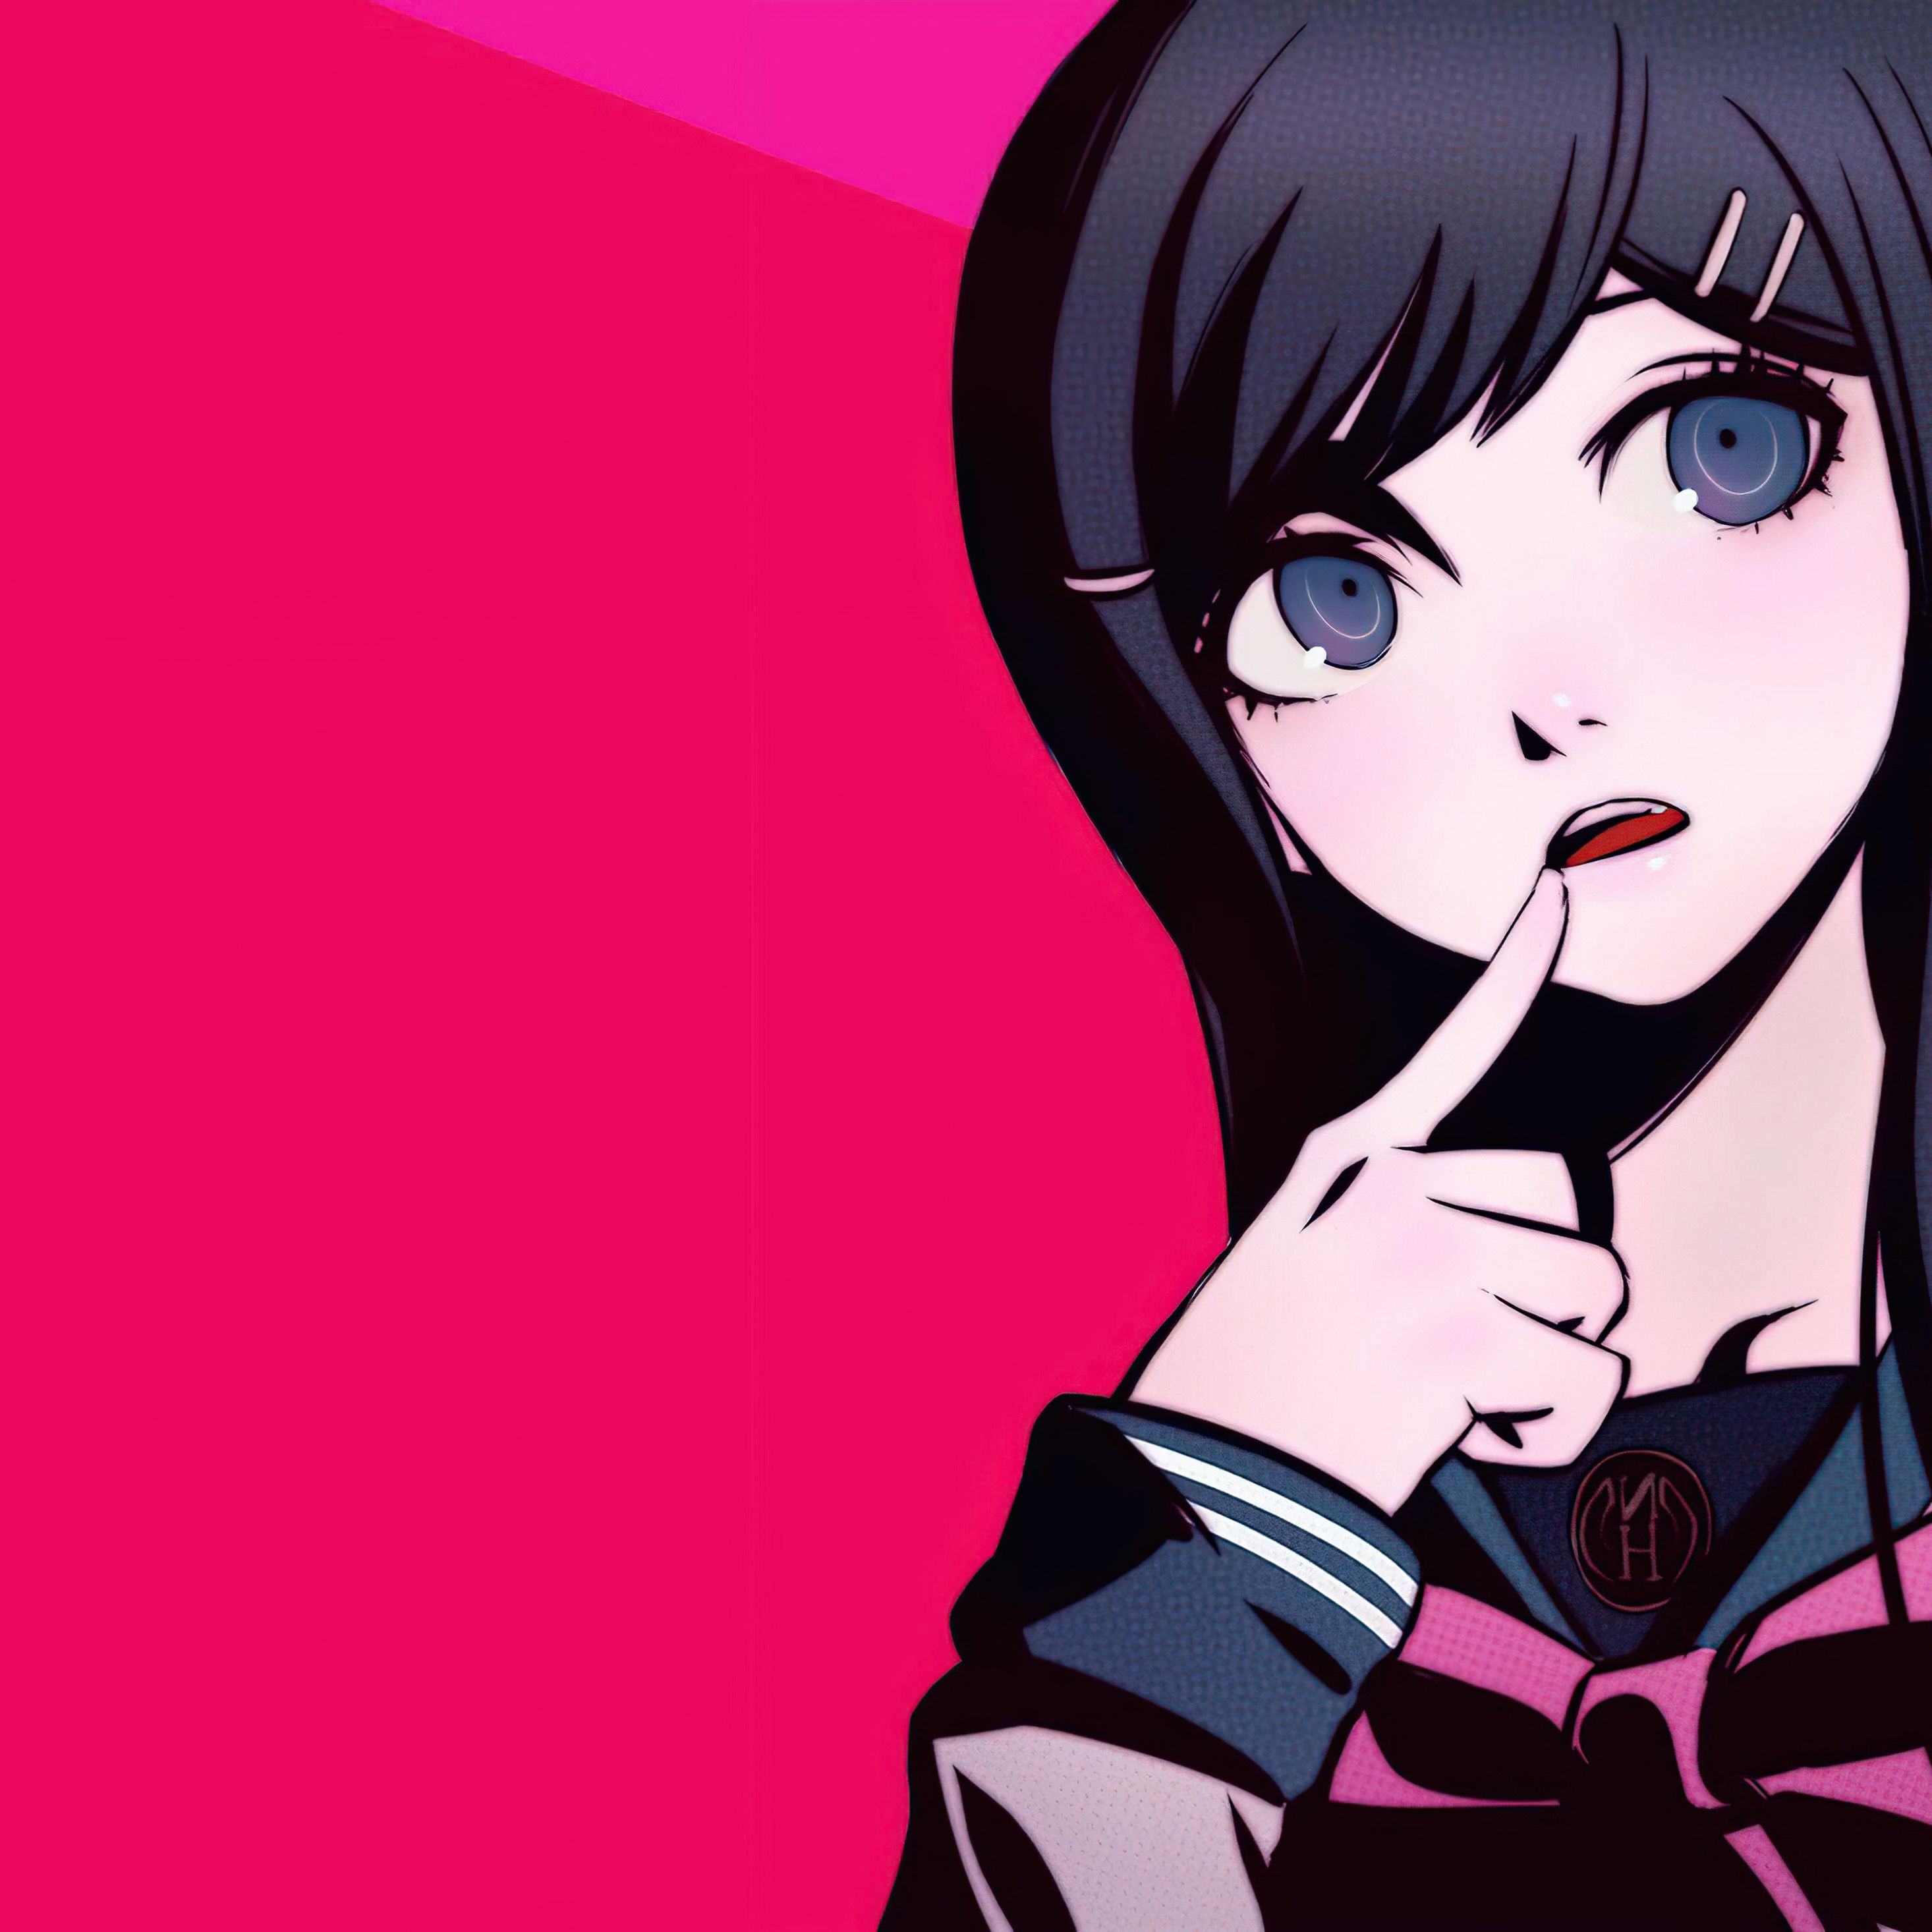 Anime girl with black hair and blue eyes in a pink background - Danganronpa